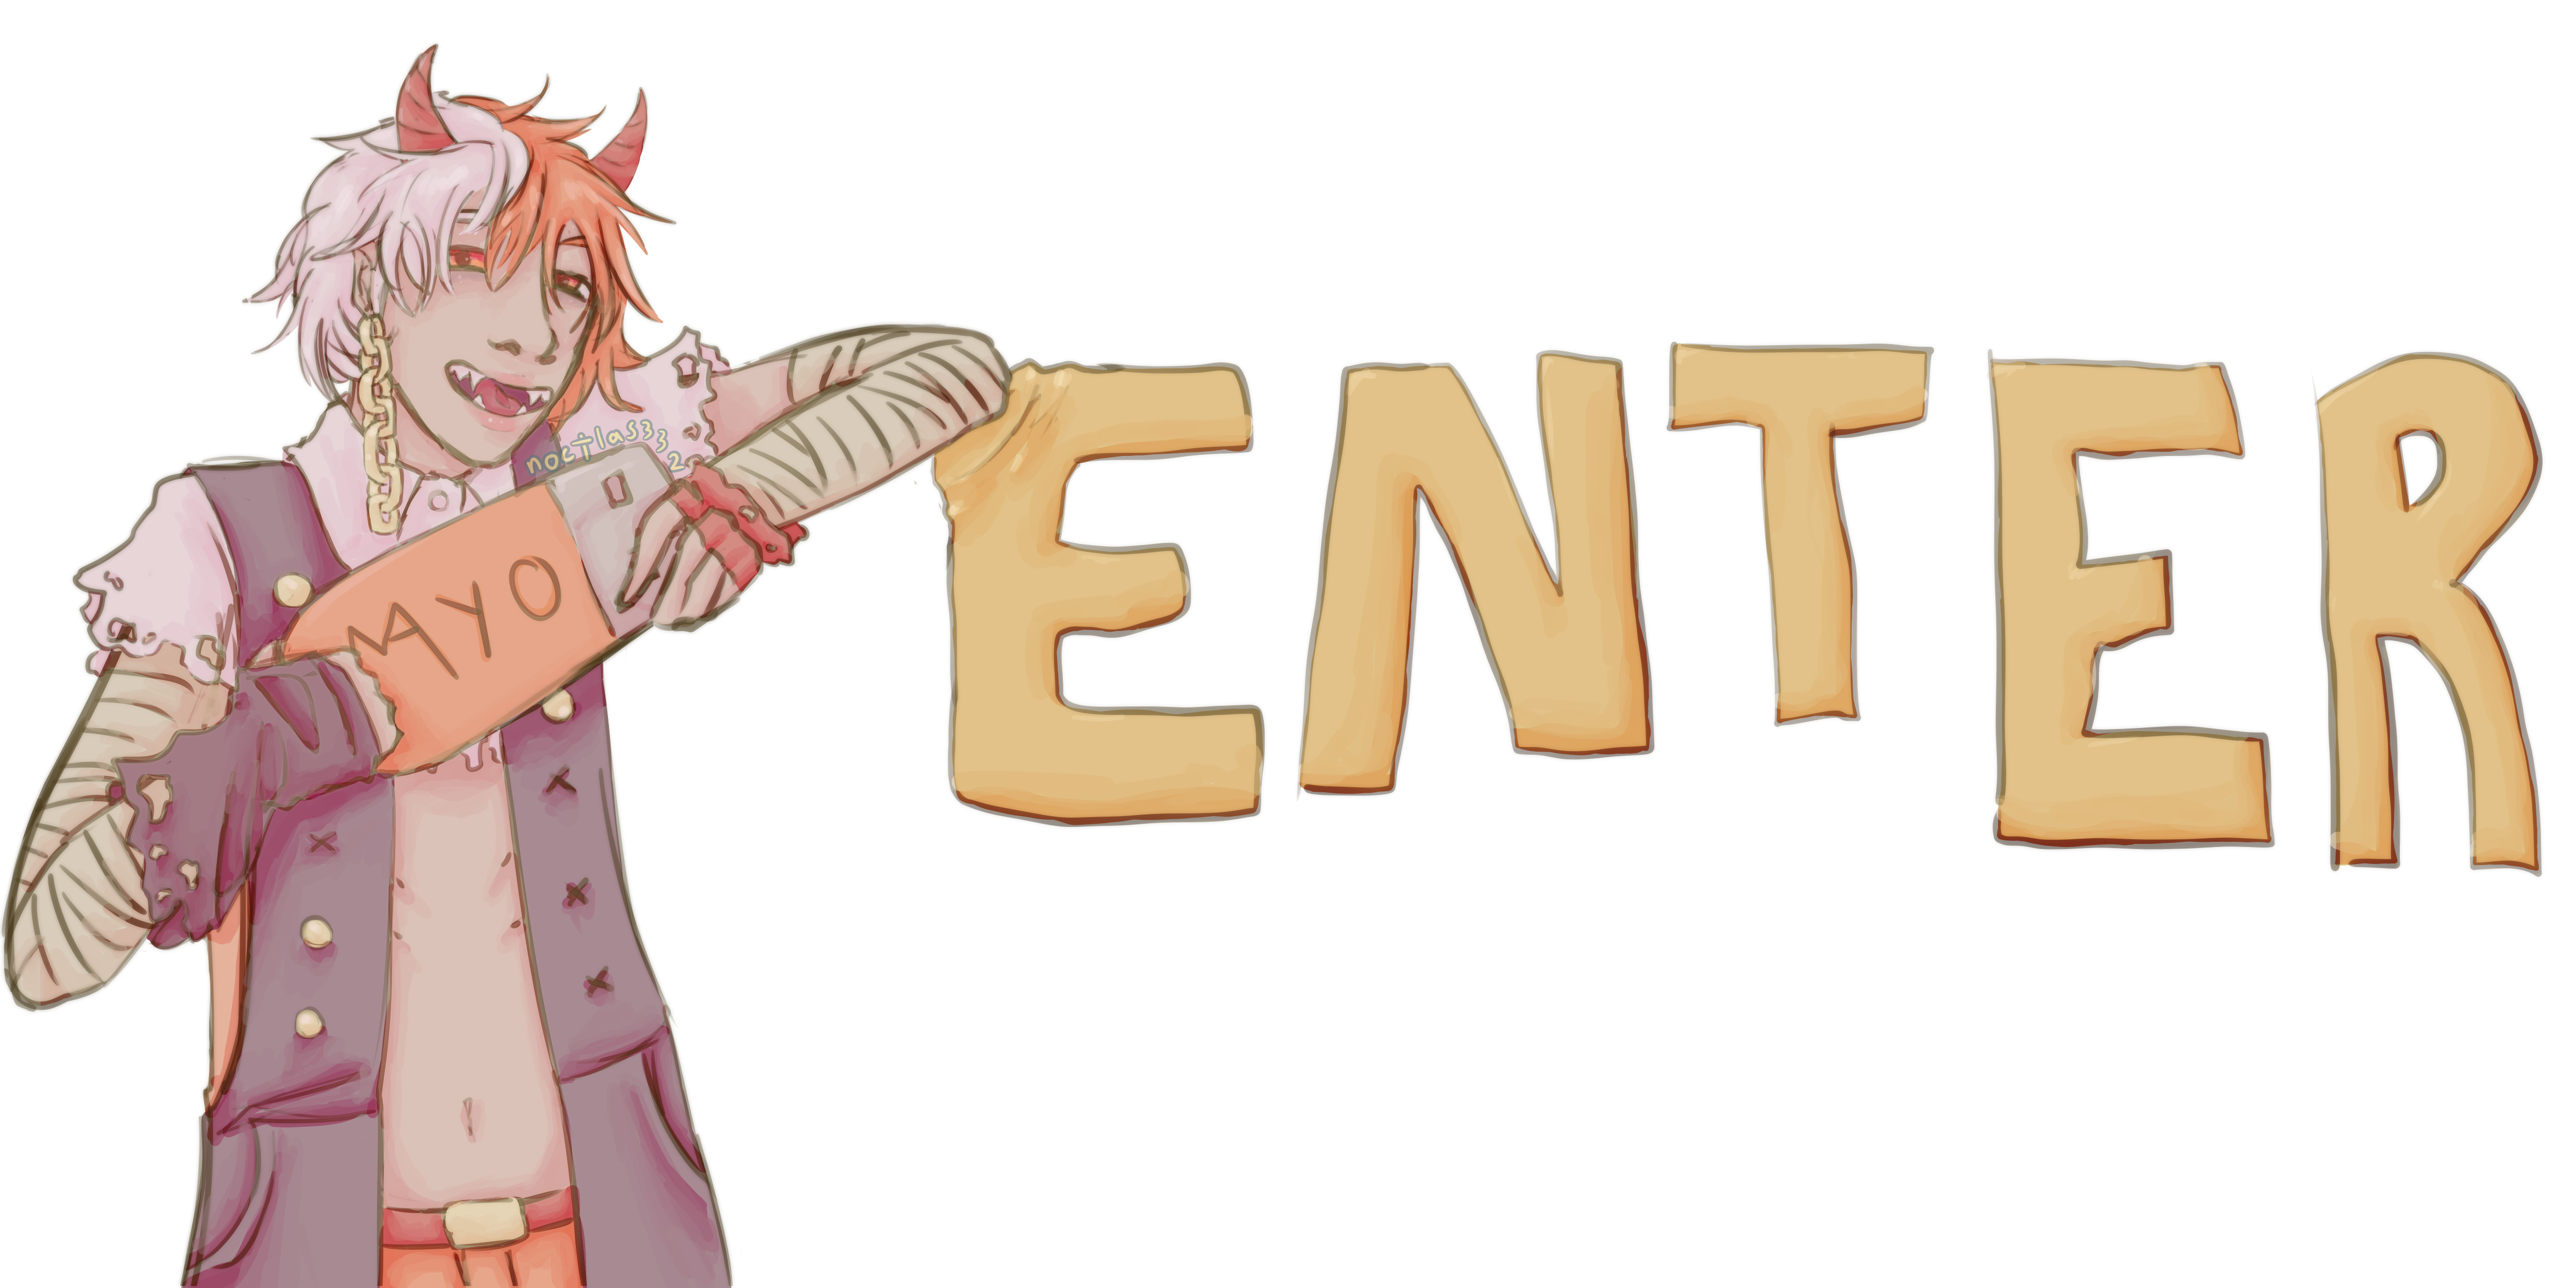 the utau character mayo coulombs holding their character item, a large usb stick, and leaning on the word ENTER. the top of the E in ENTER is slightly crumpled from mayo leaning on it 